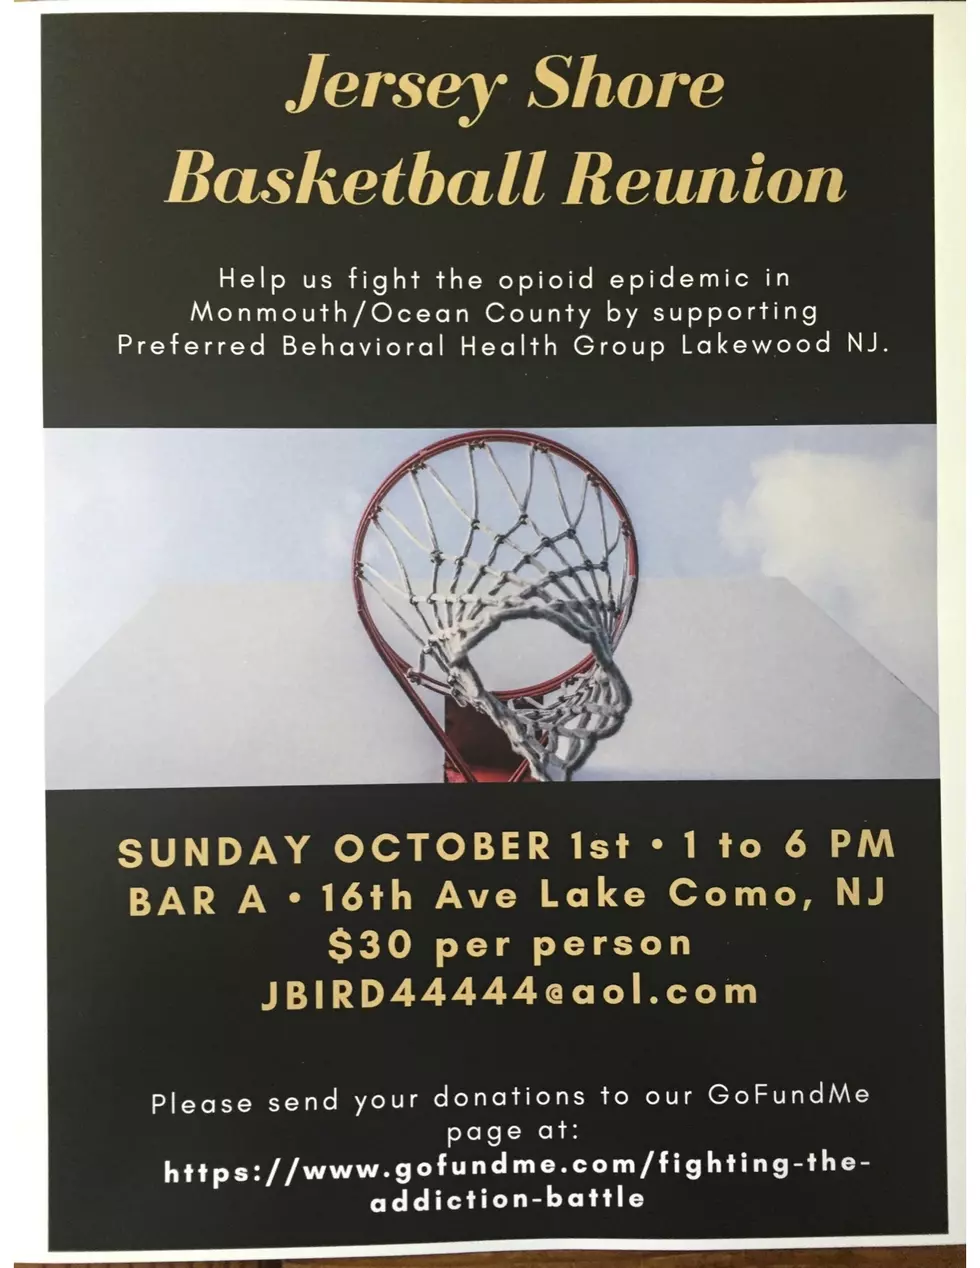 A Basketball Get-Together To Fight An Epidemic